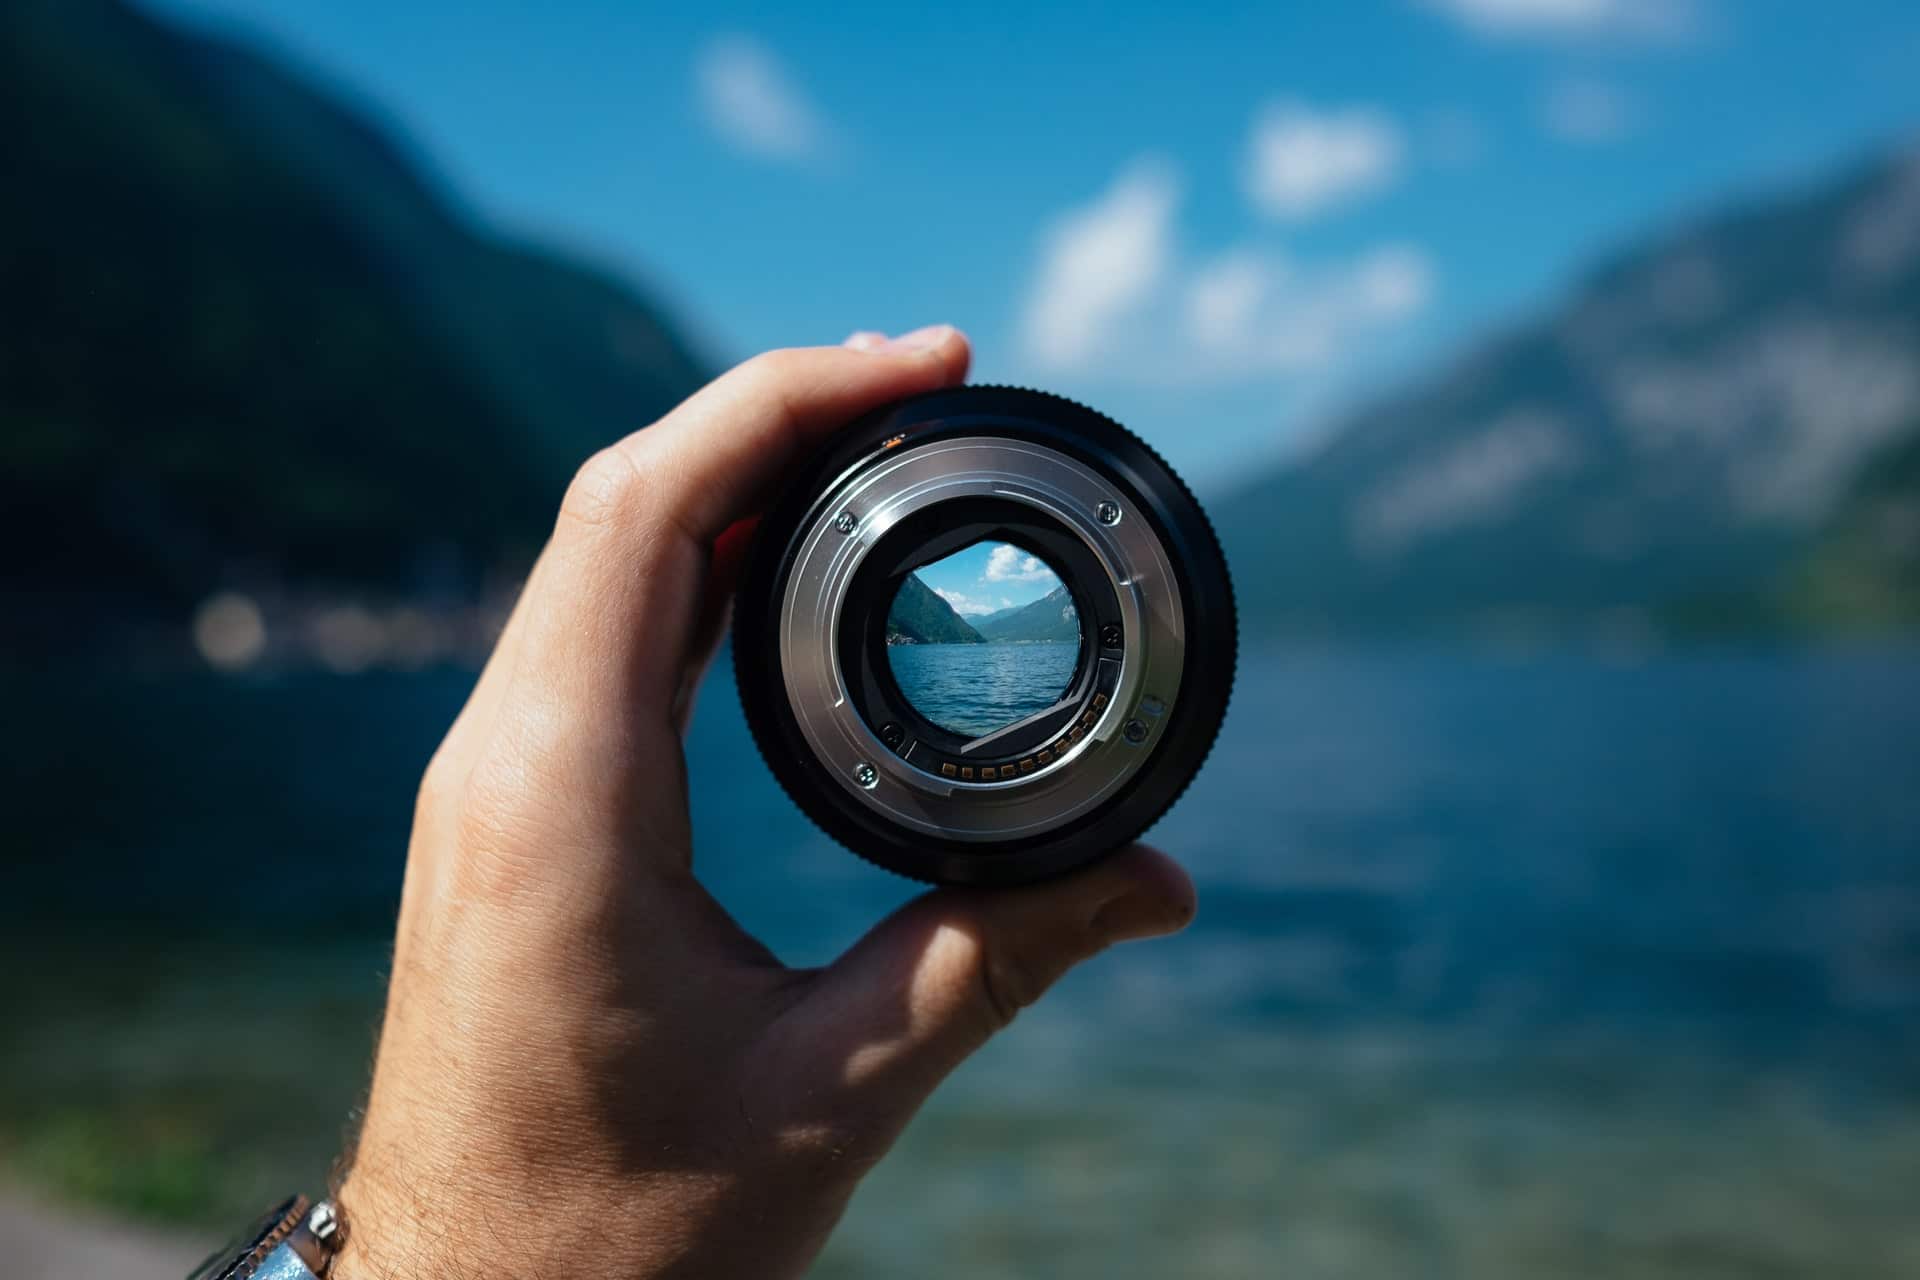 How To Improve Focus: 8 Proven Strategies - Freedom Matters